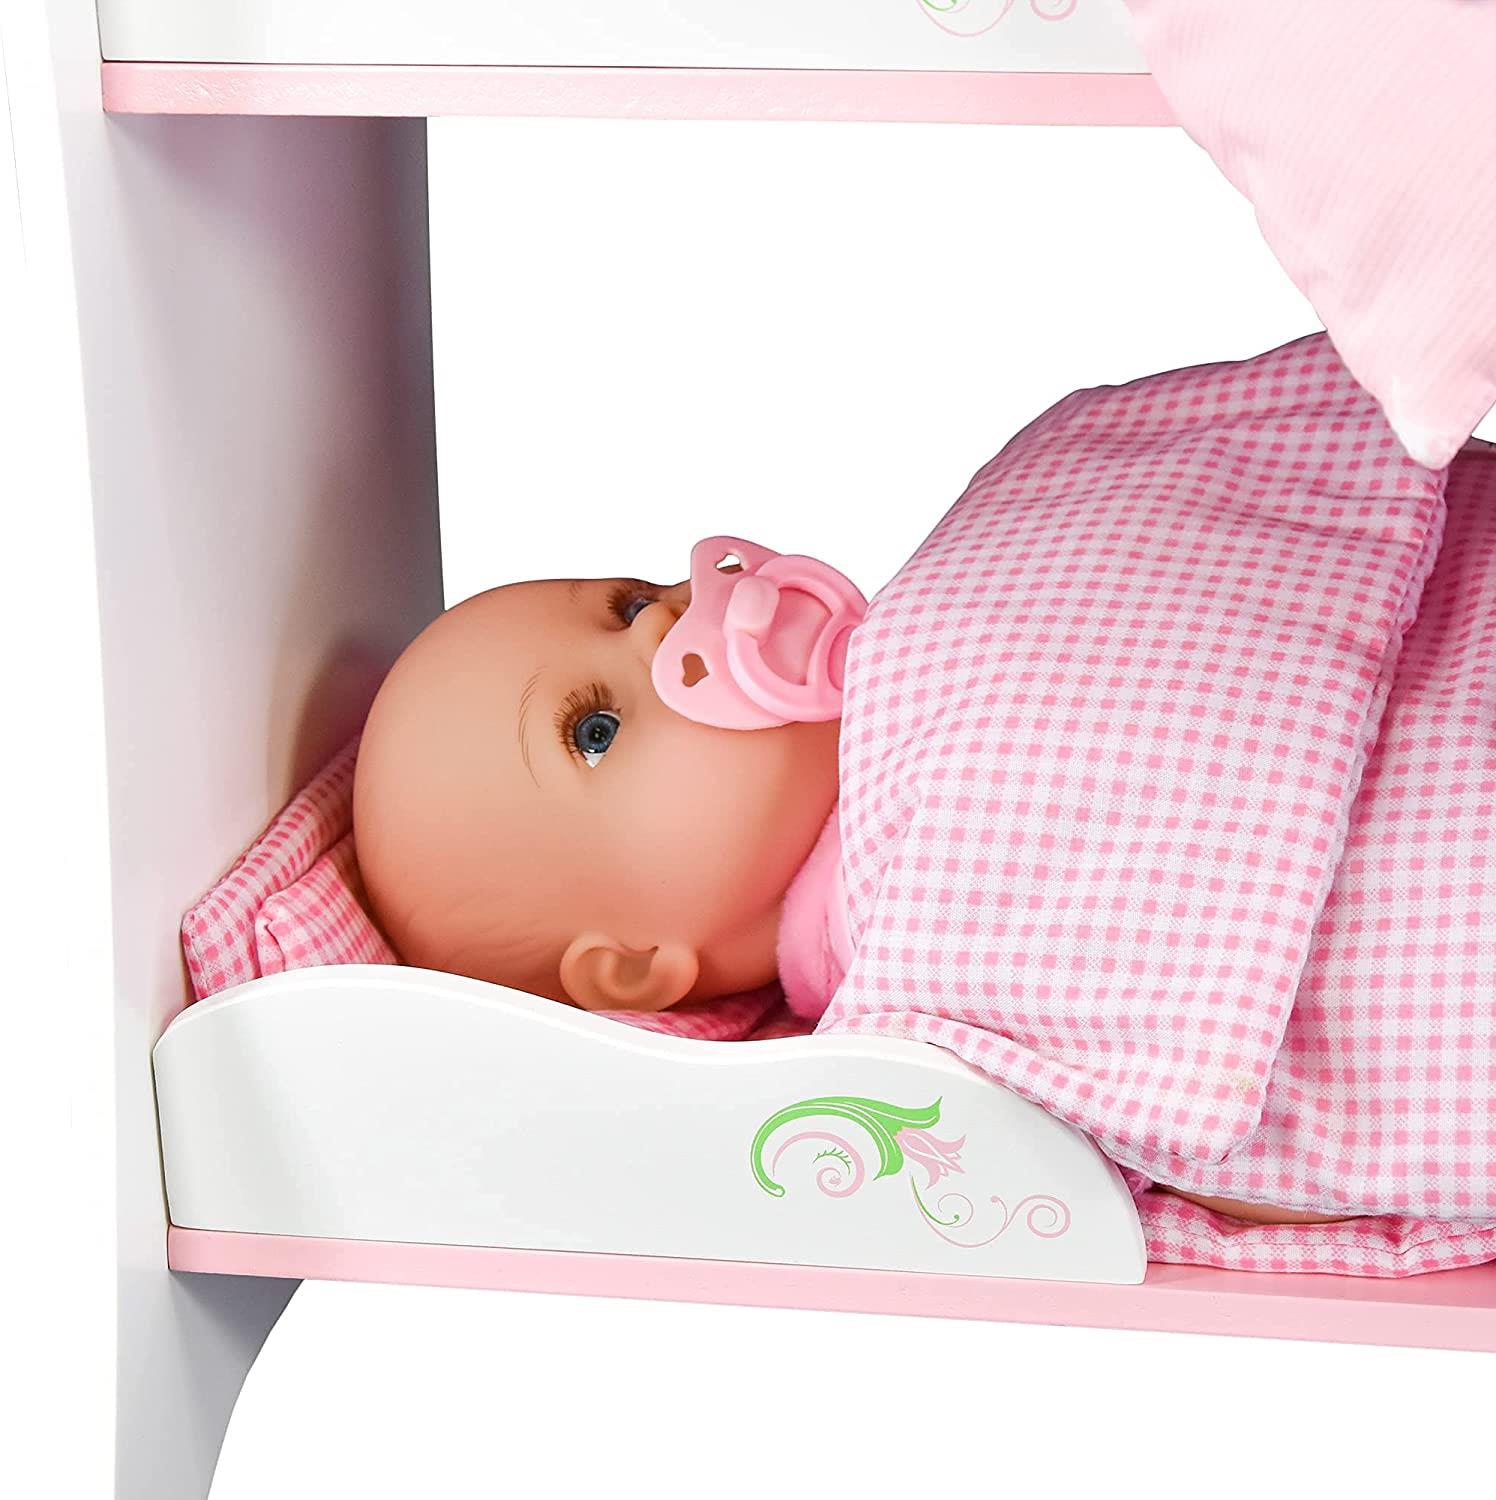 Dolls Wooden Bunk Bed by BiBi Doll - The Magic Toy Shop